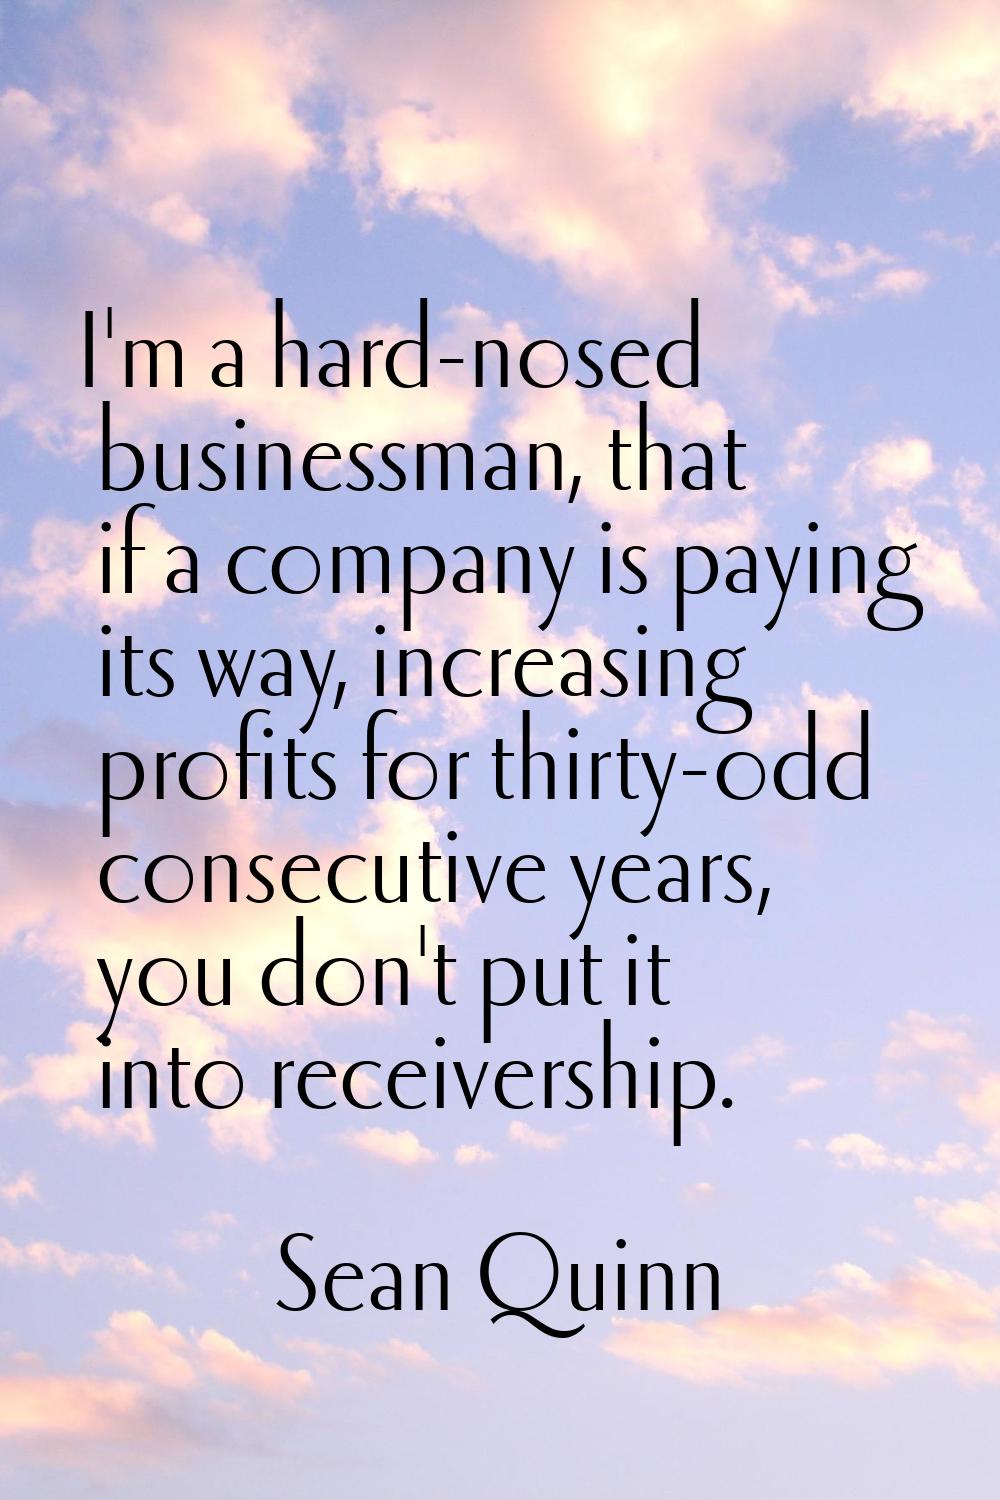 I'm a hard-nosed businessman, that if a company is paying its way, increasing profits for thirty-od